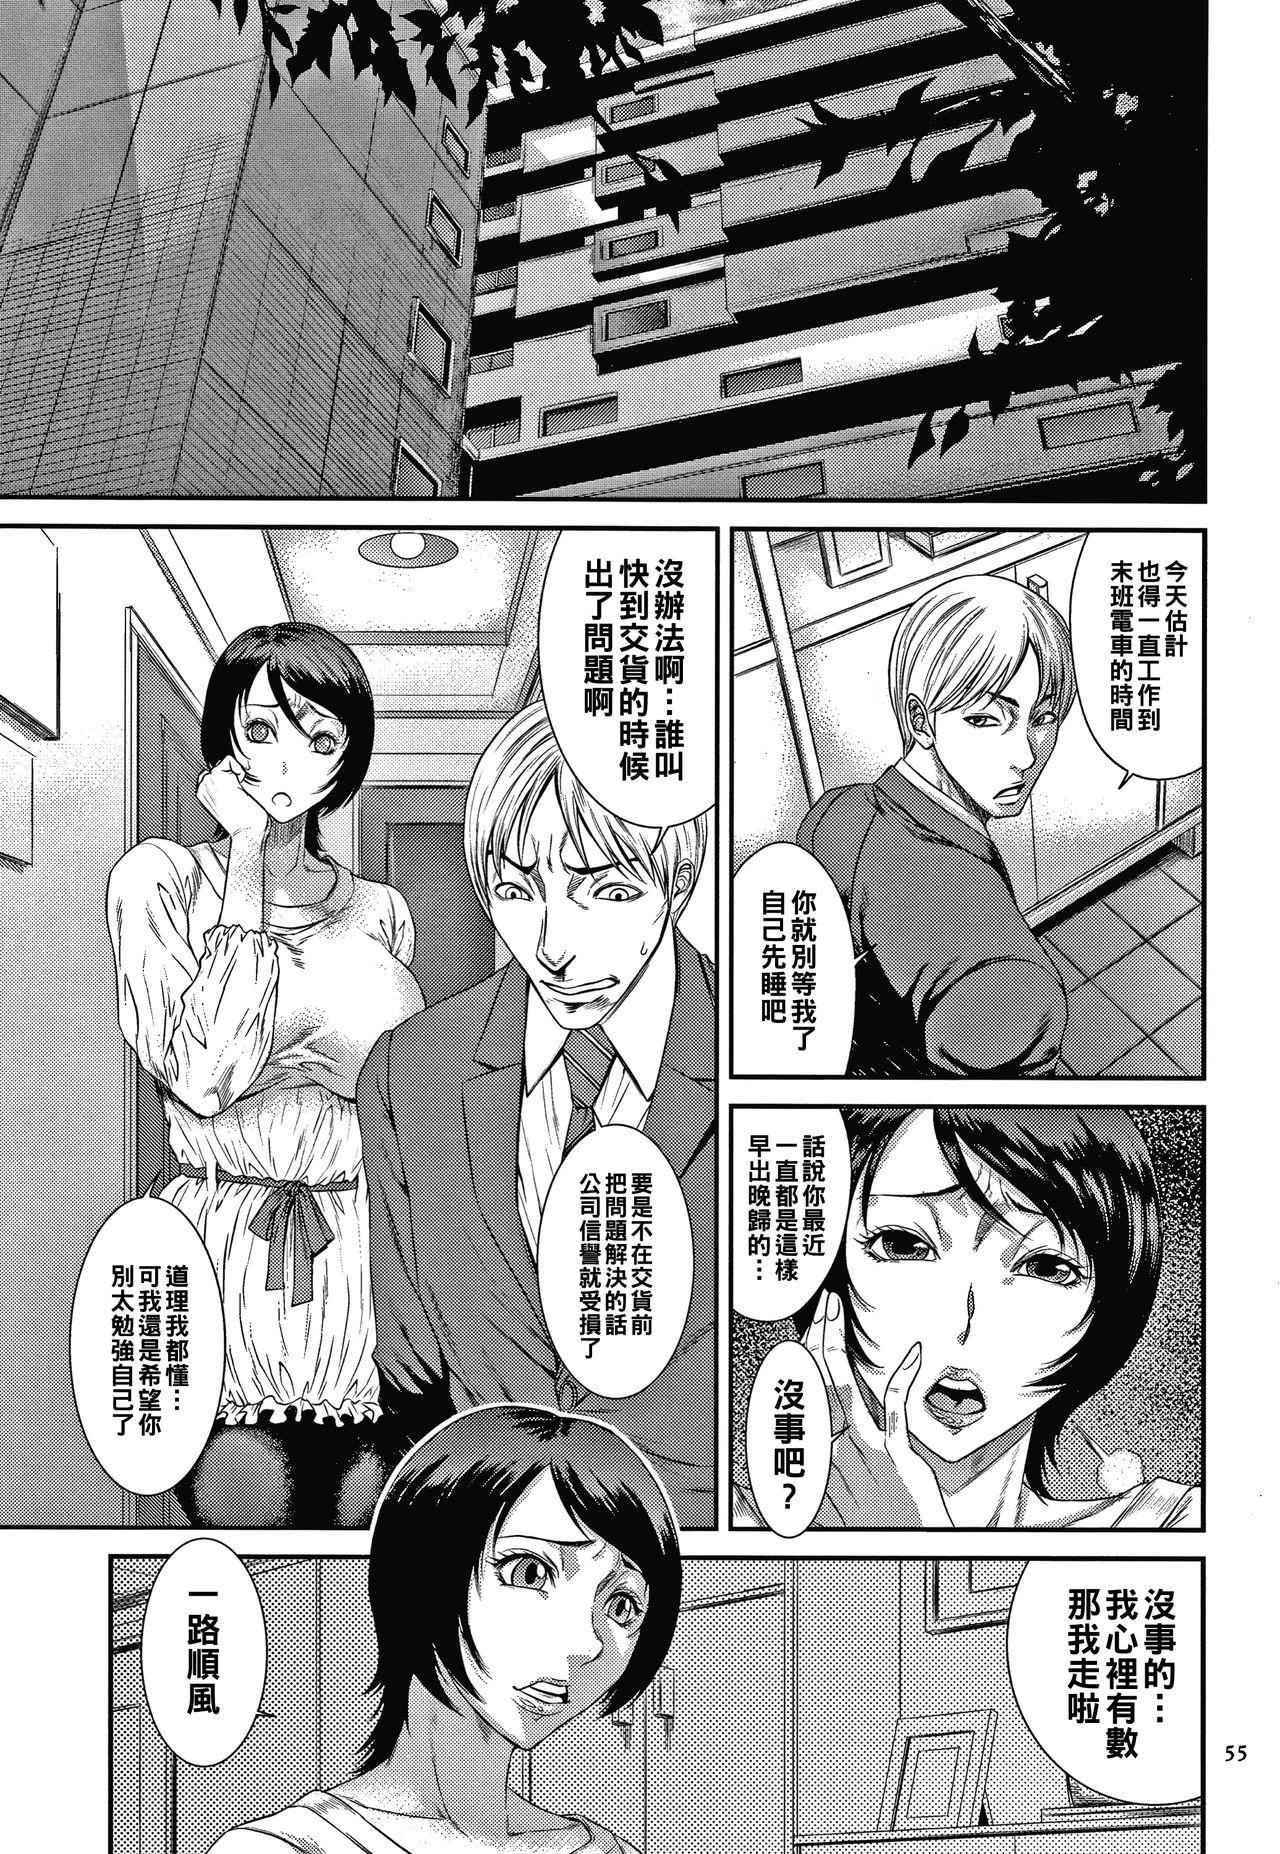 Virgin 罪悪感と快楽主義（Chinese） Cut - Page 3